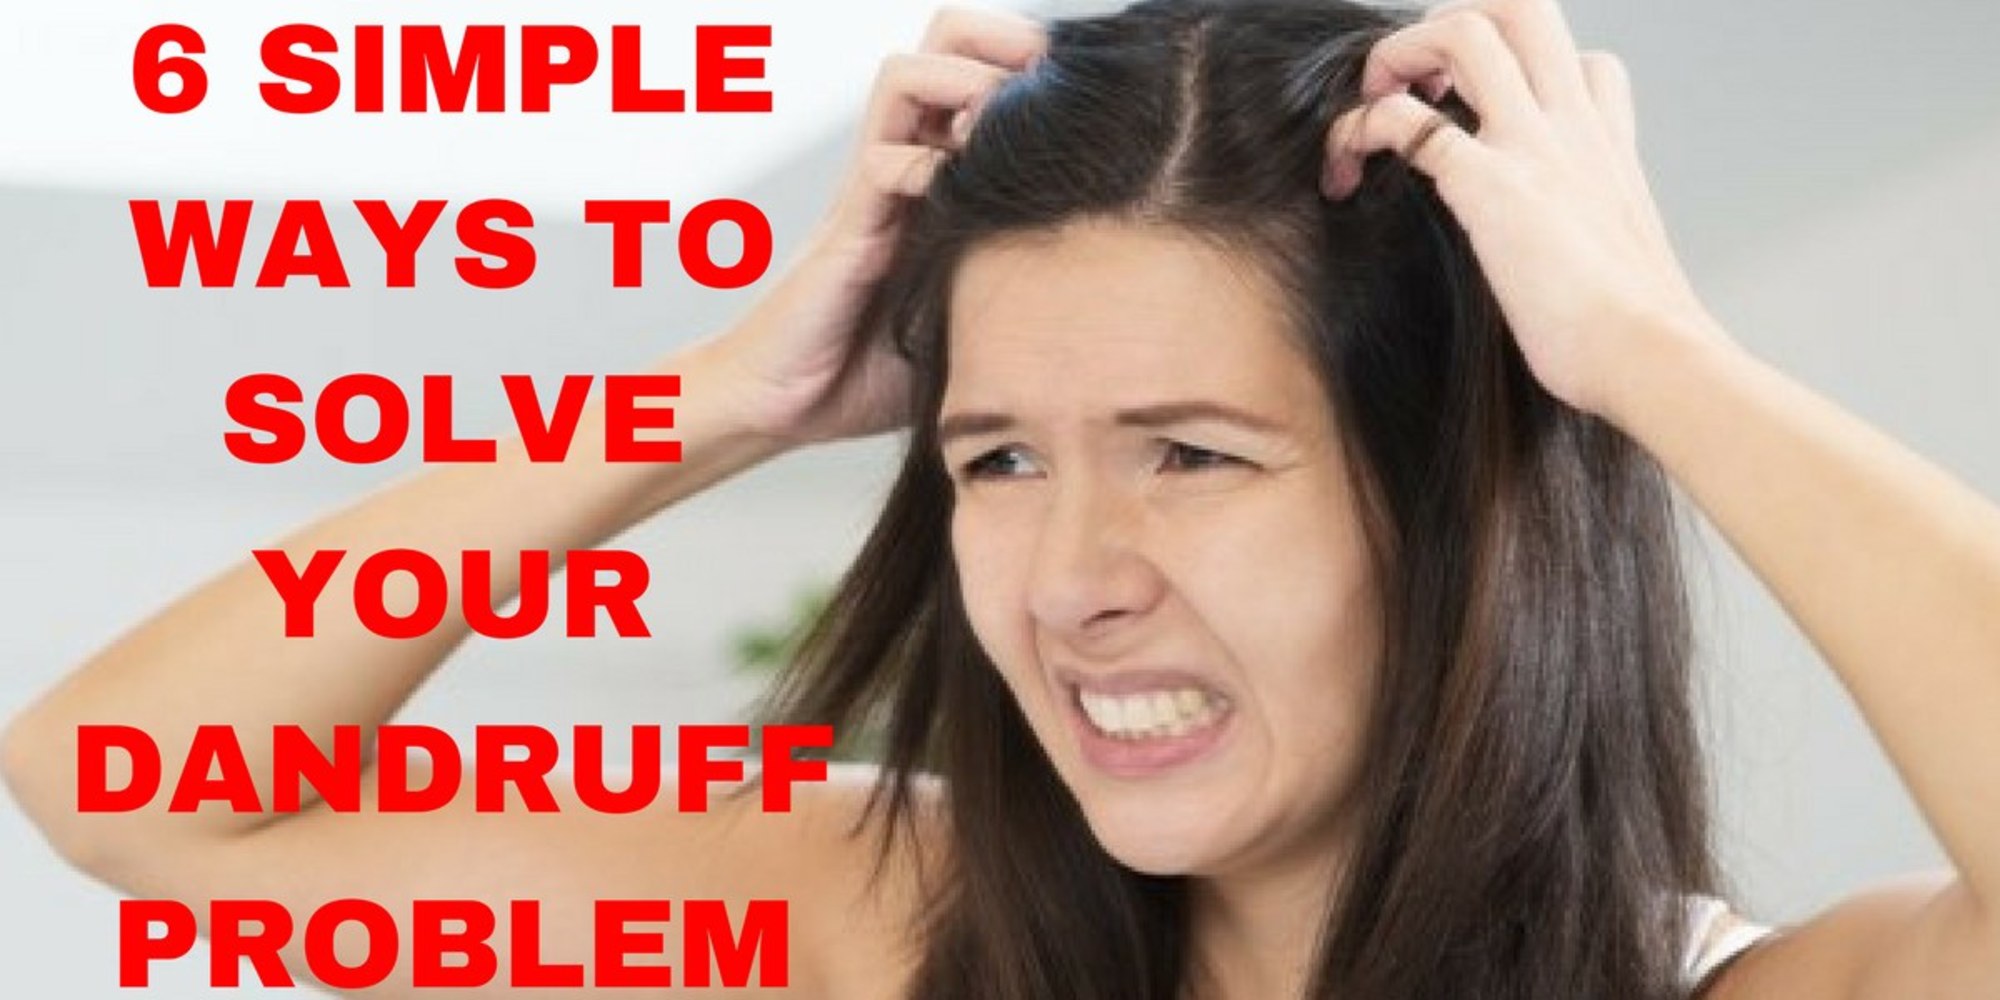 how to solve problem dandruff